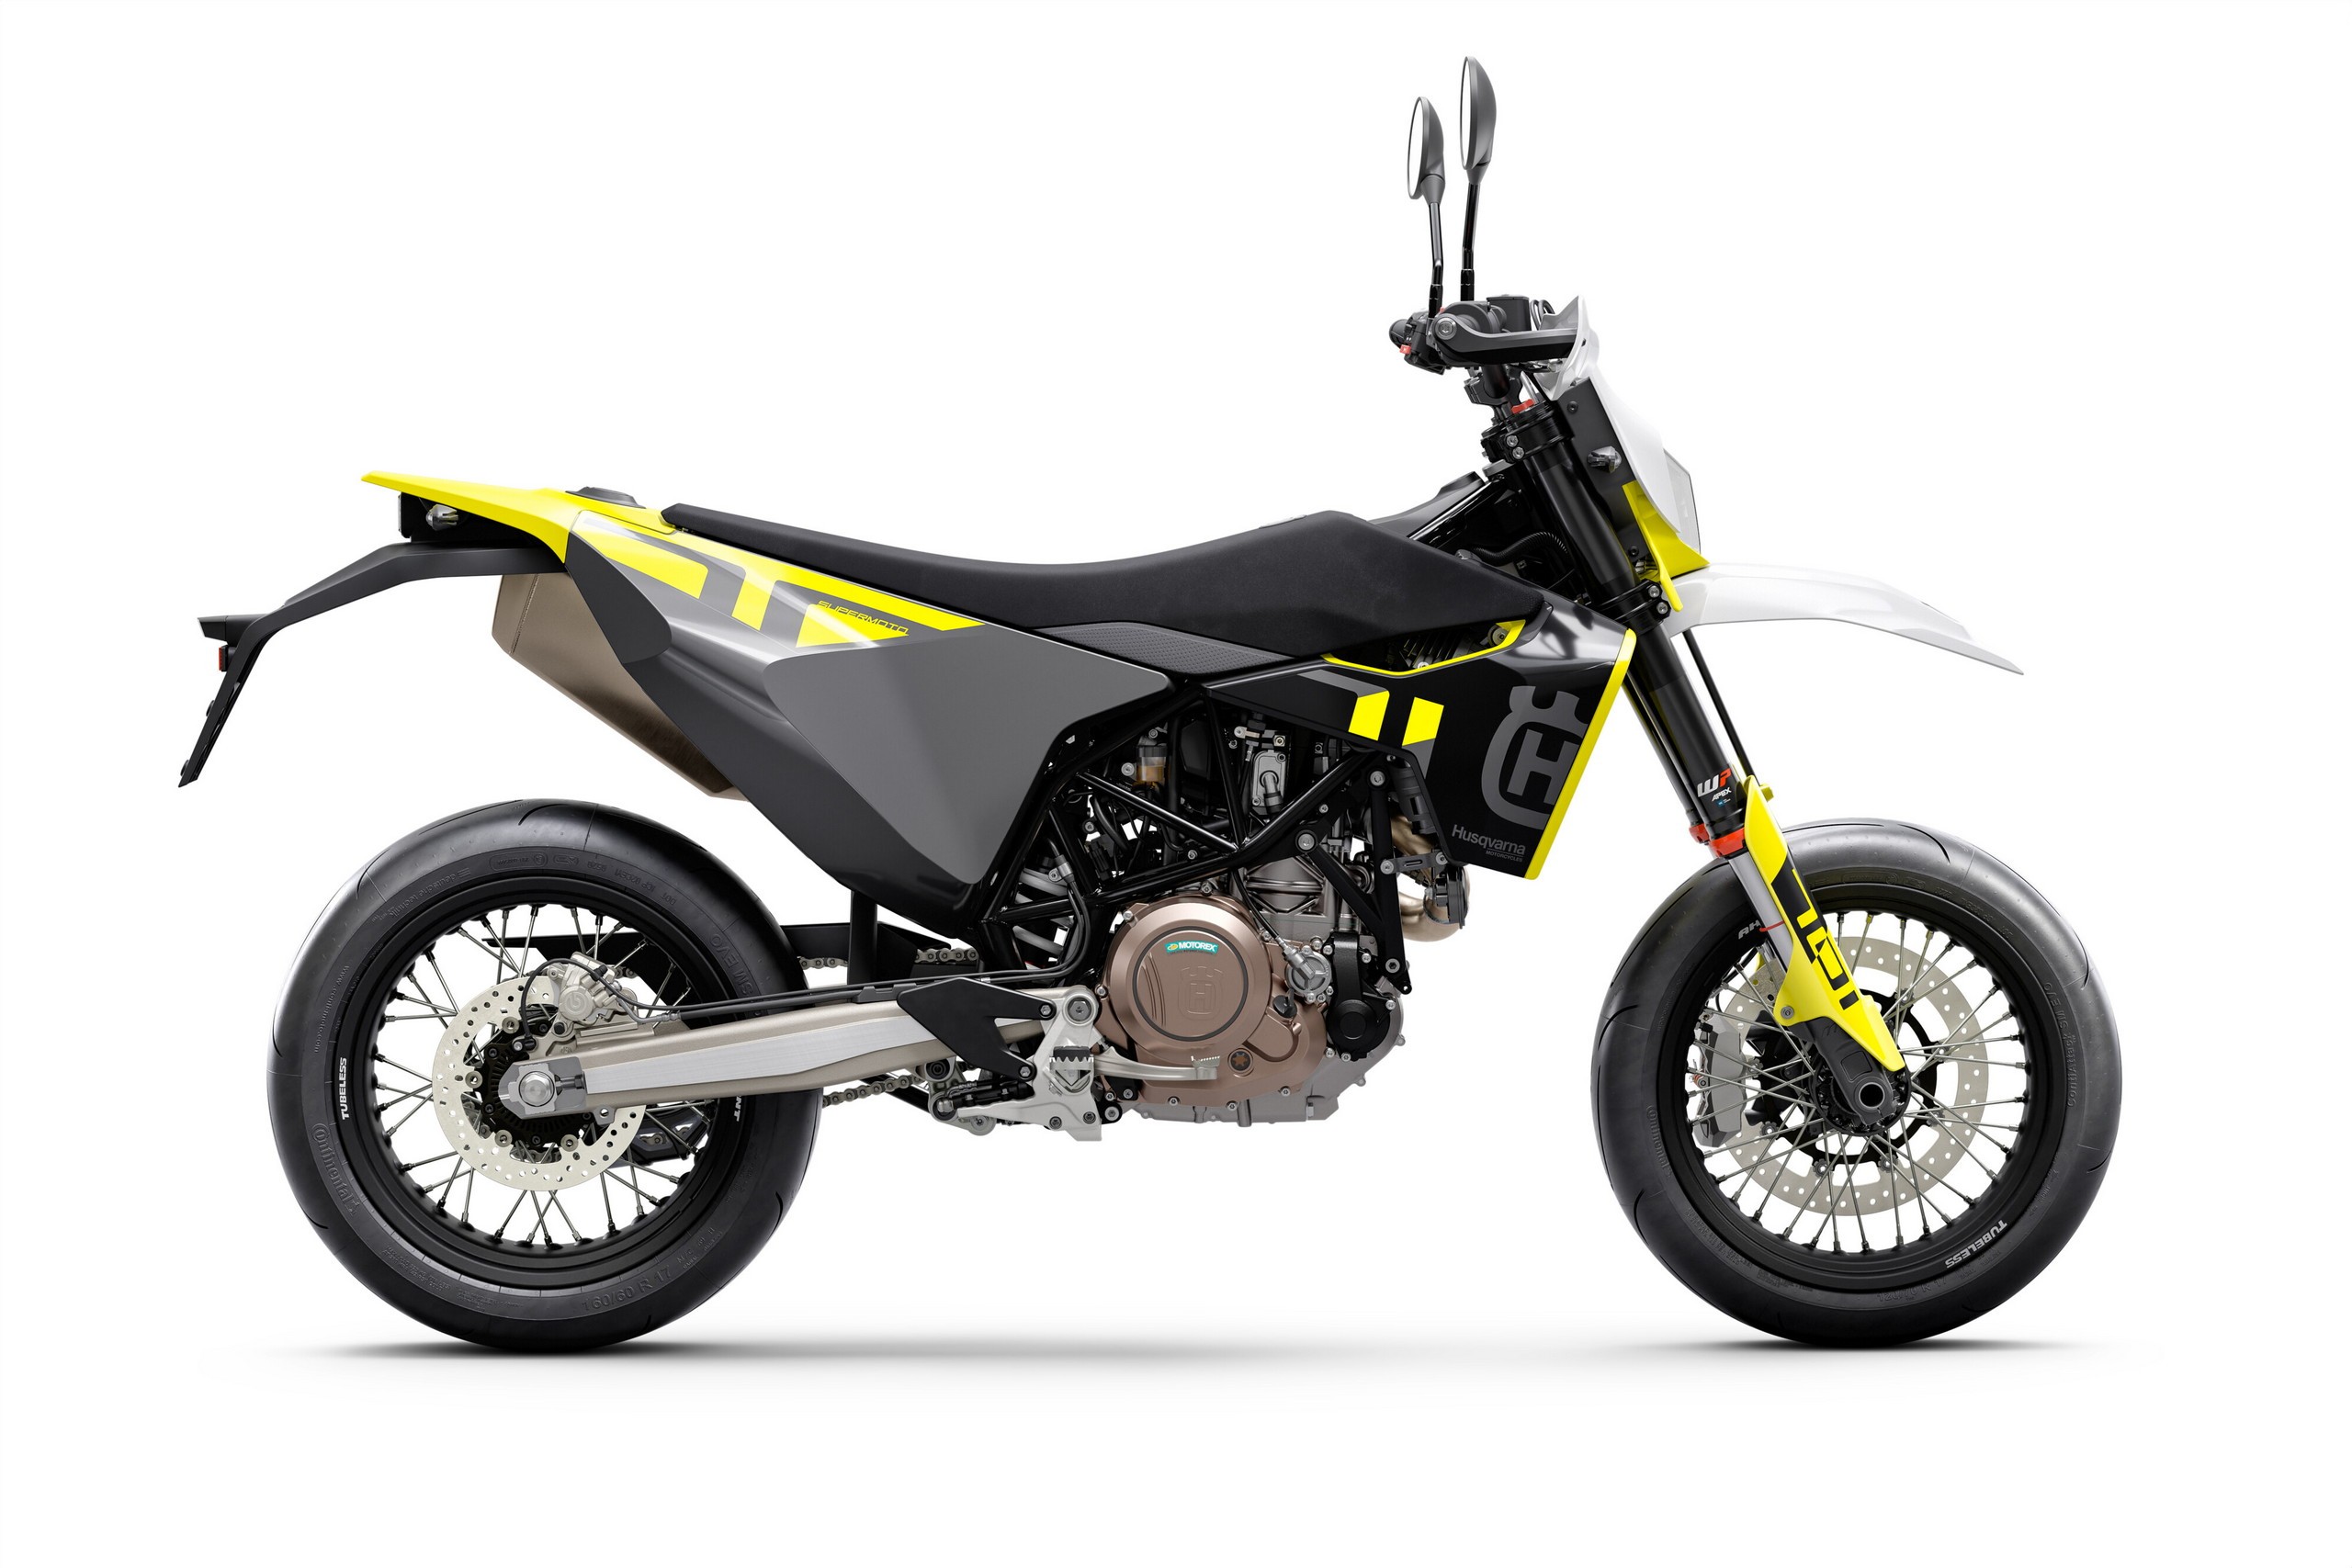 Husqvarna s New 701 Supermoto Delivers High Performance On Any Terrain 